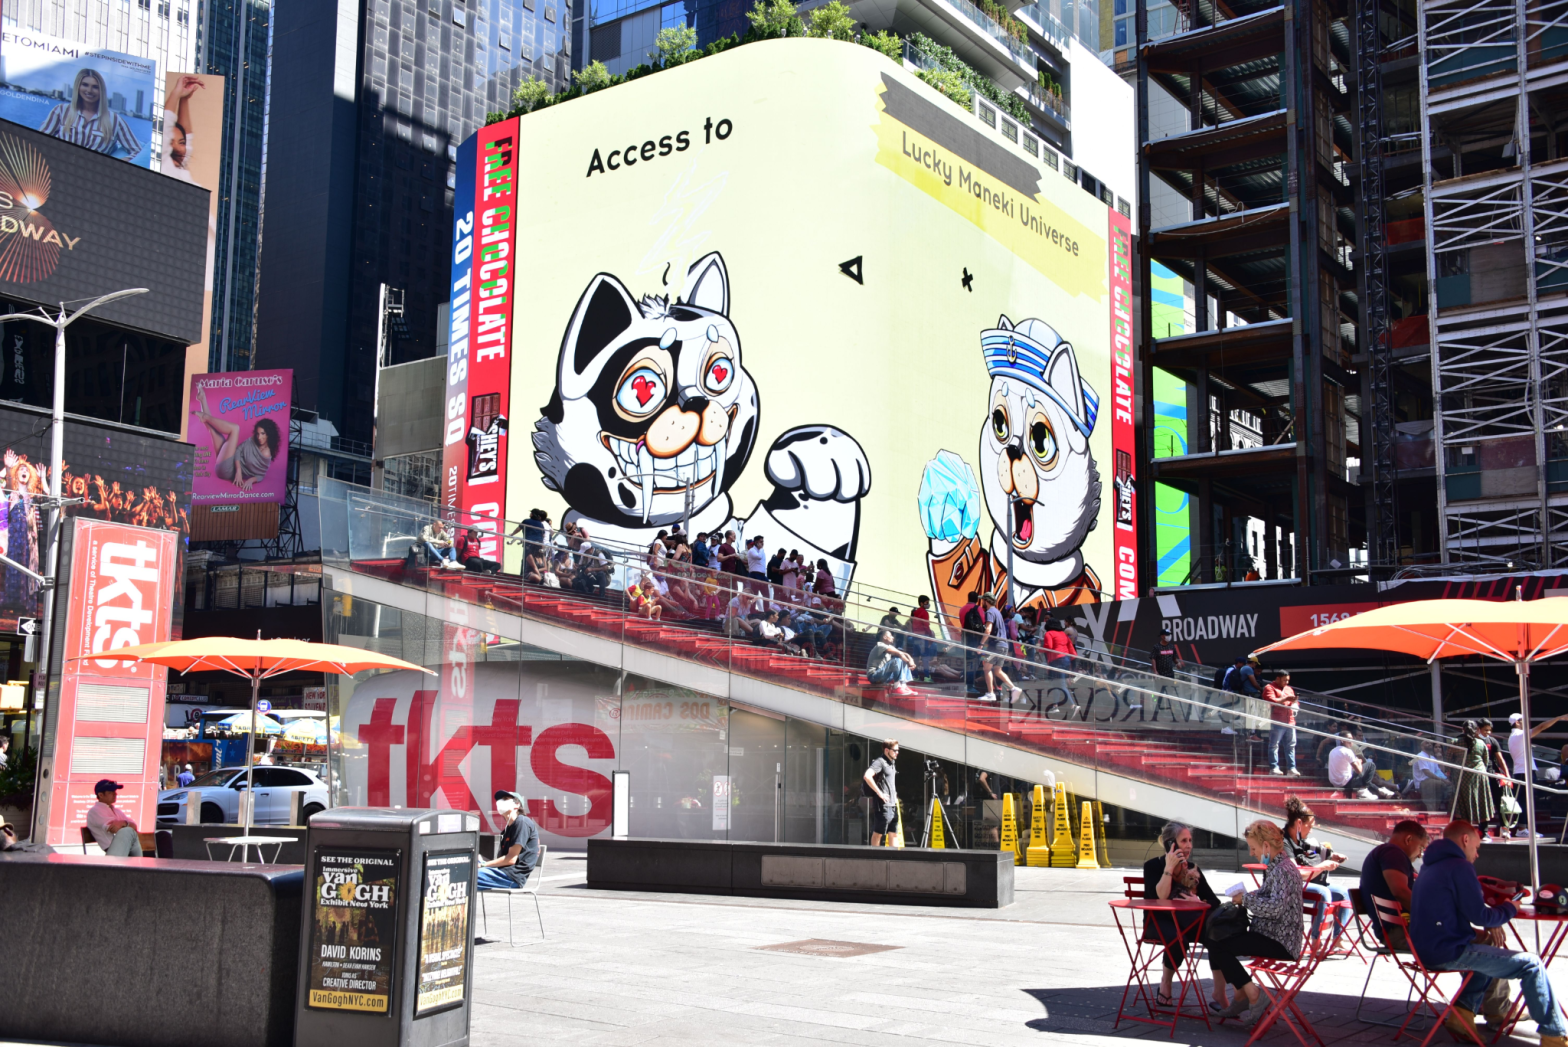  Lucky Maneki Community Reveals New Line of NFT Collectibles on Times Square Billboard